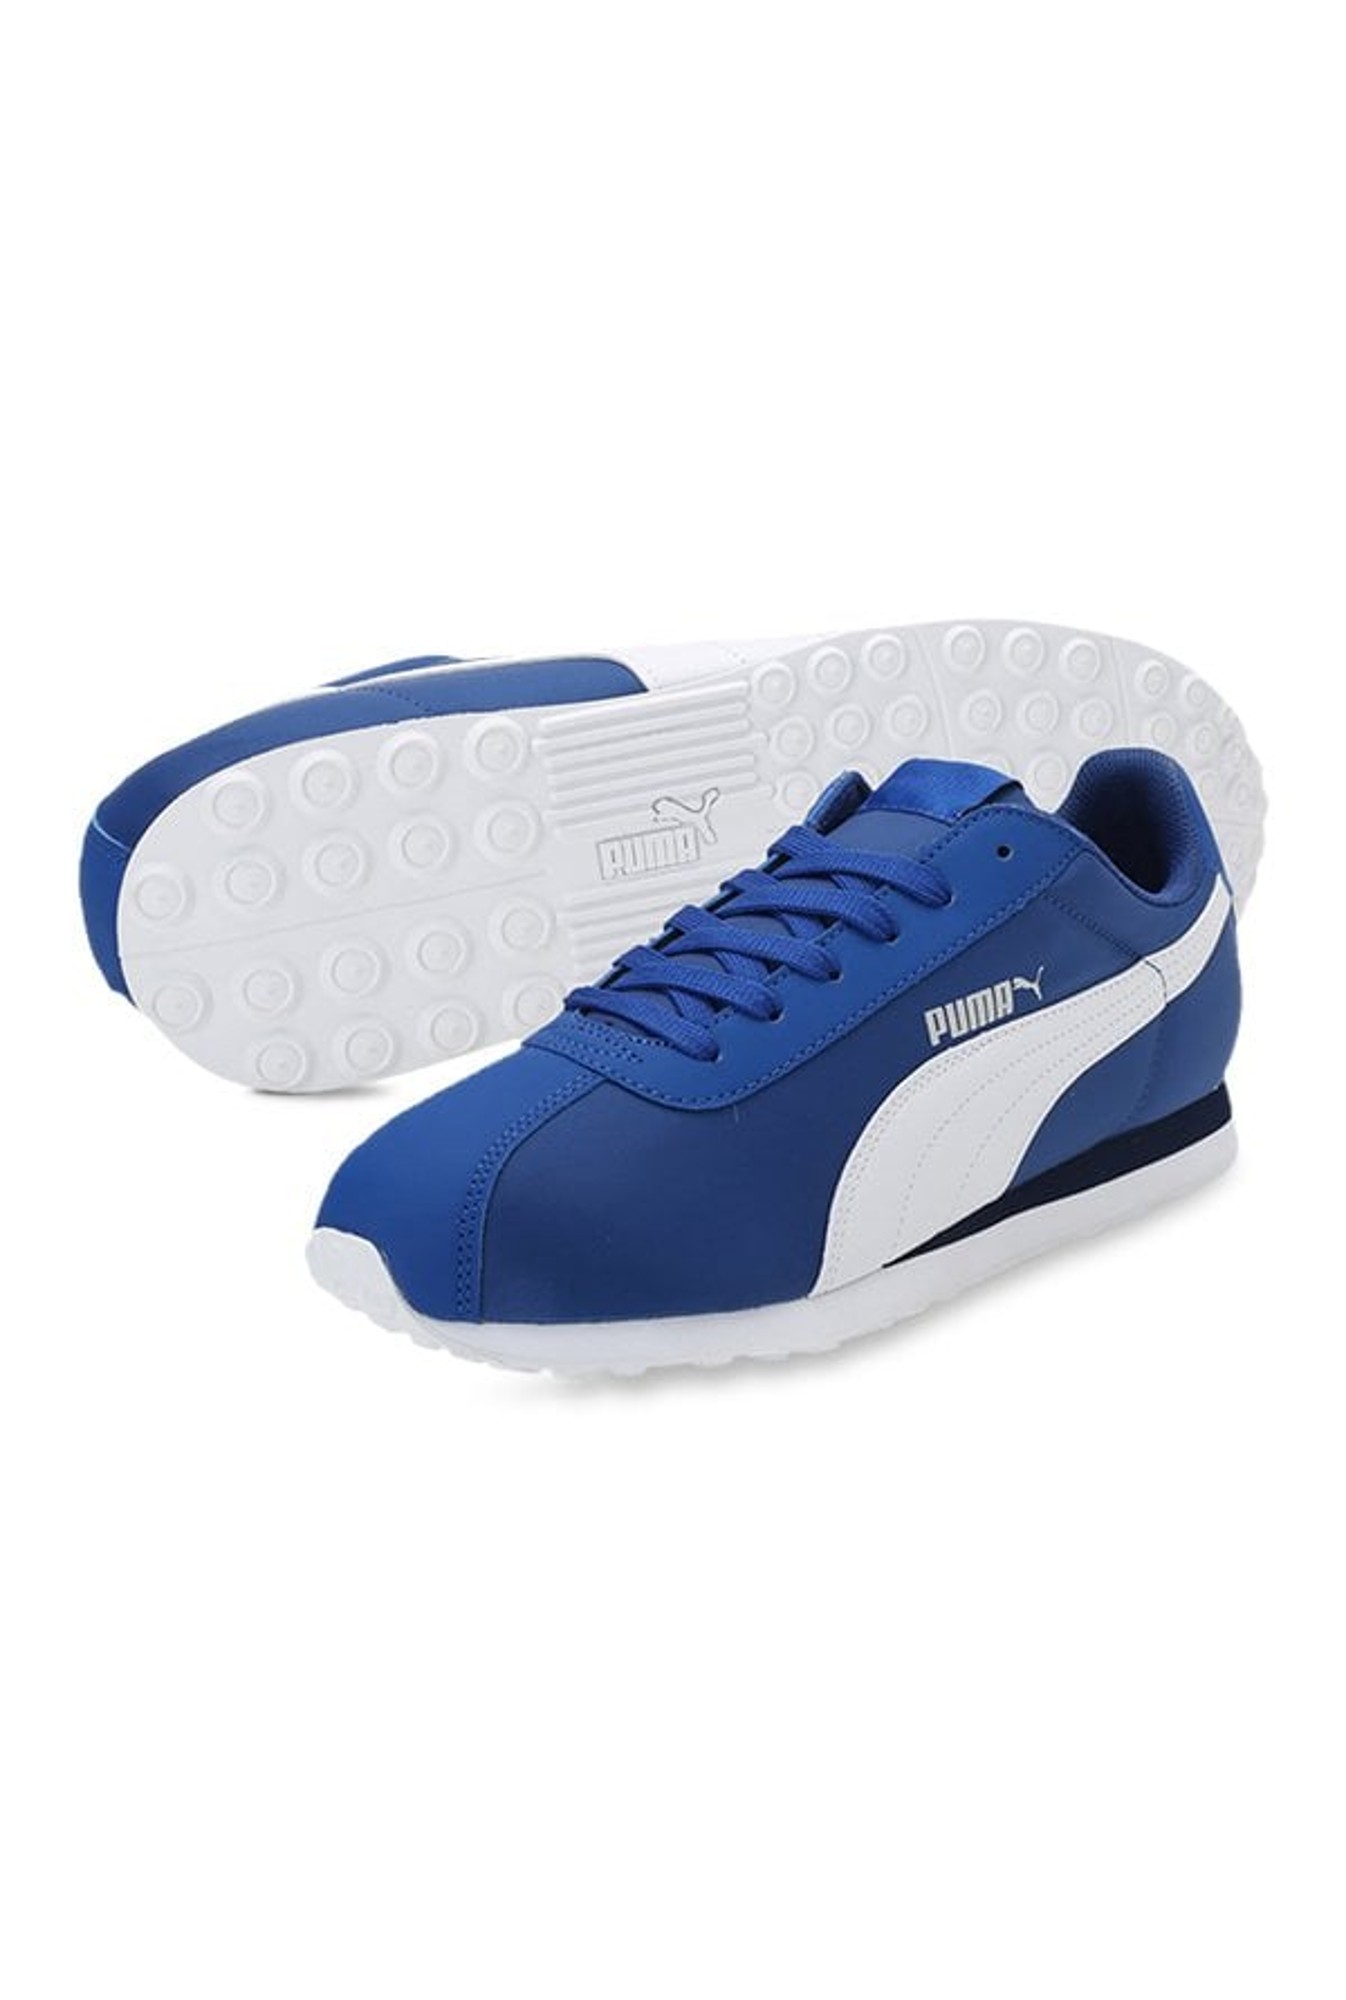 Buy Puma Turin II Unisex Casual Shoes - White Online